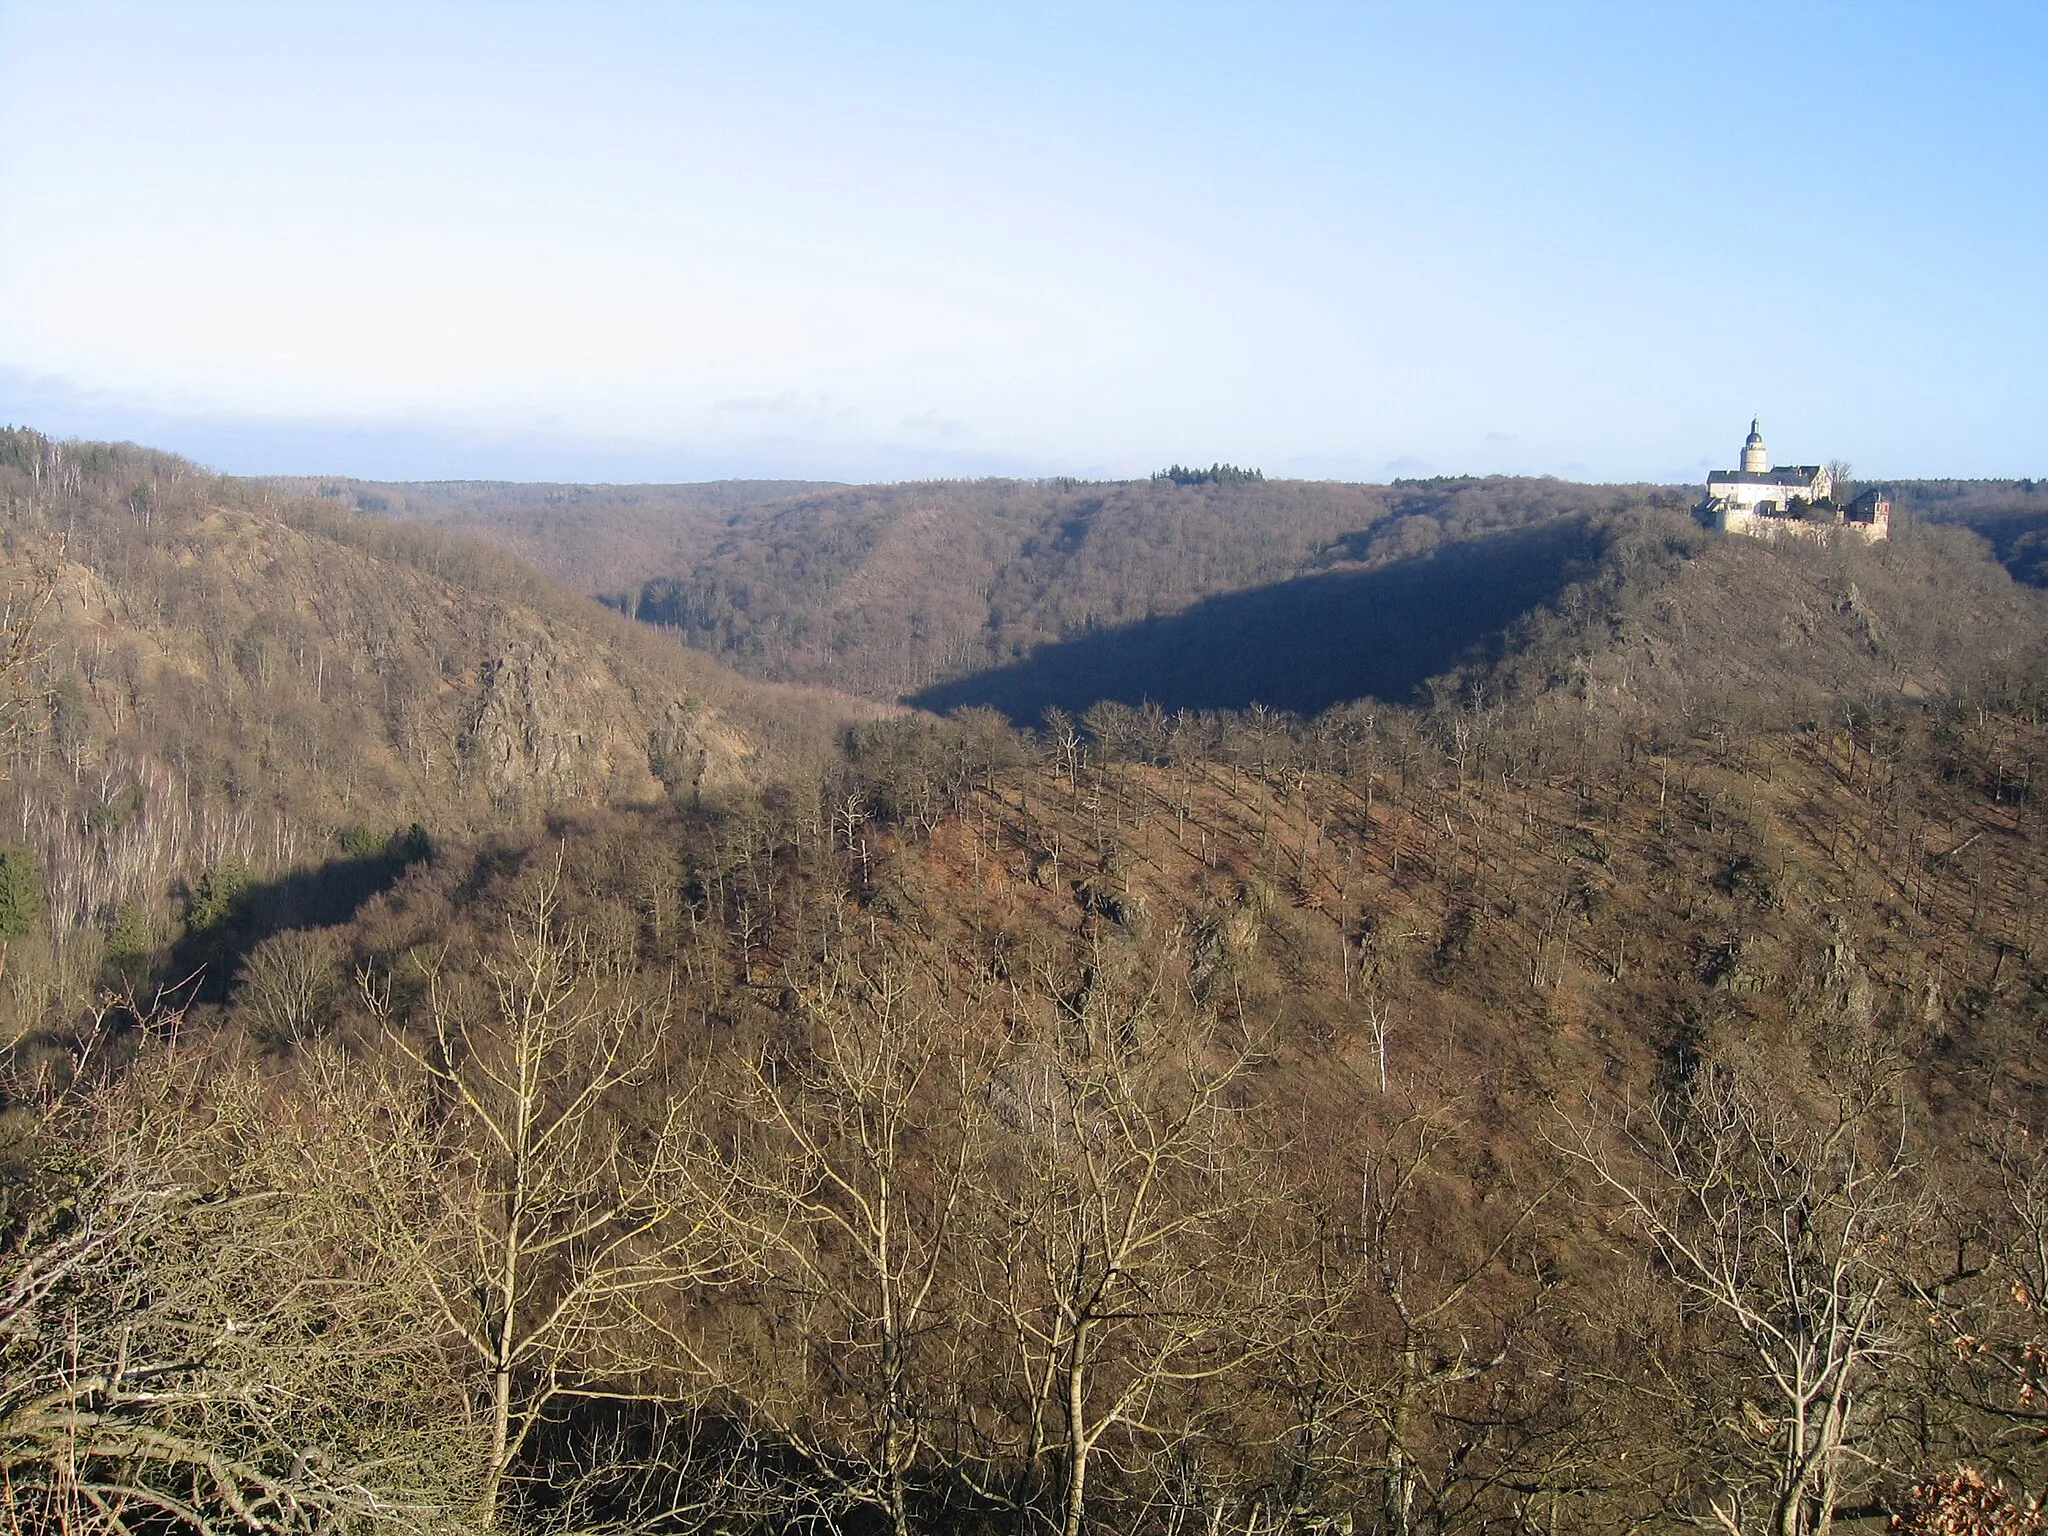 Photo showing: View of the Selke valley and Falkenstein Castle from the Selkesicht viewing point in the Harz Mountains of Germany